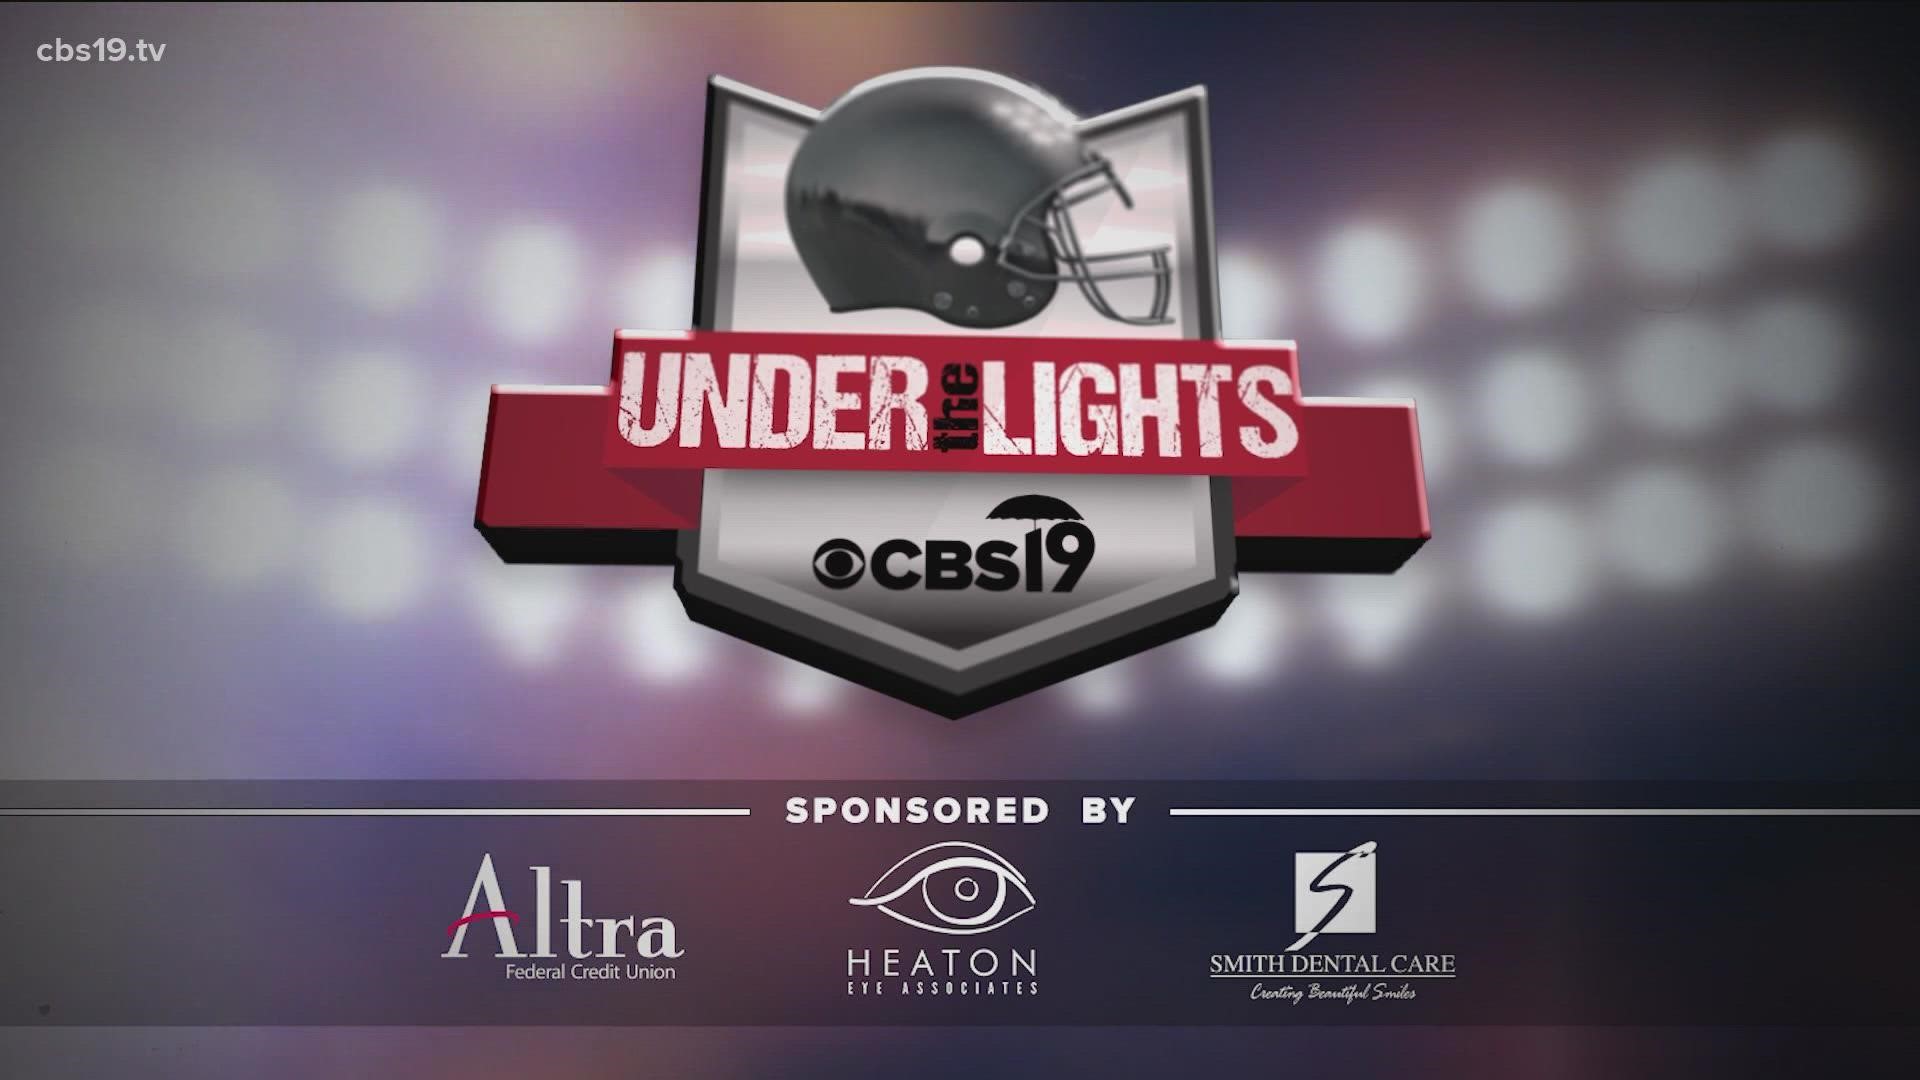 Under the Lights airs Fridays at 10:15 p.m. on CBS19 and 11 p.m. on The CW.